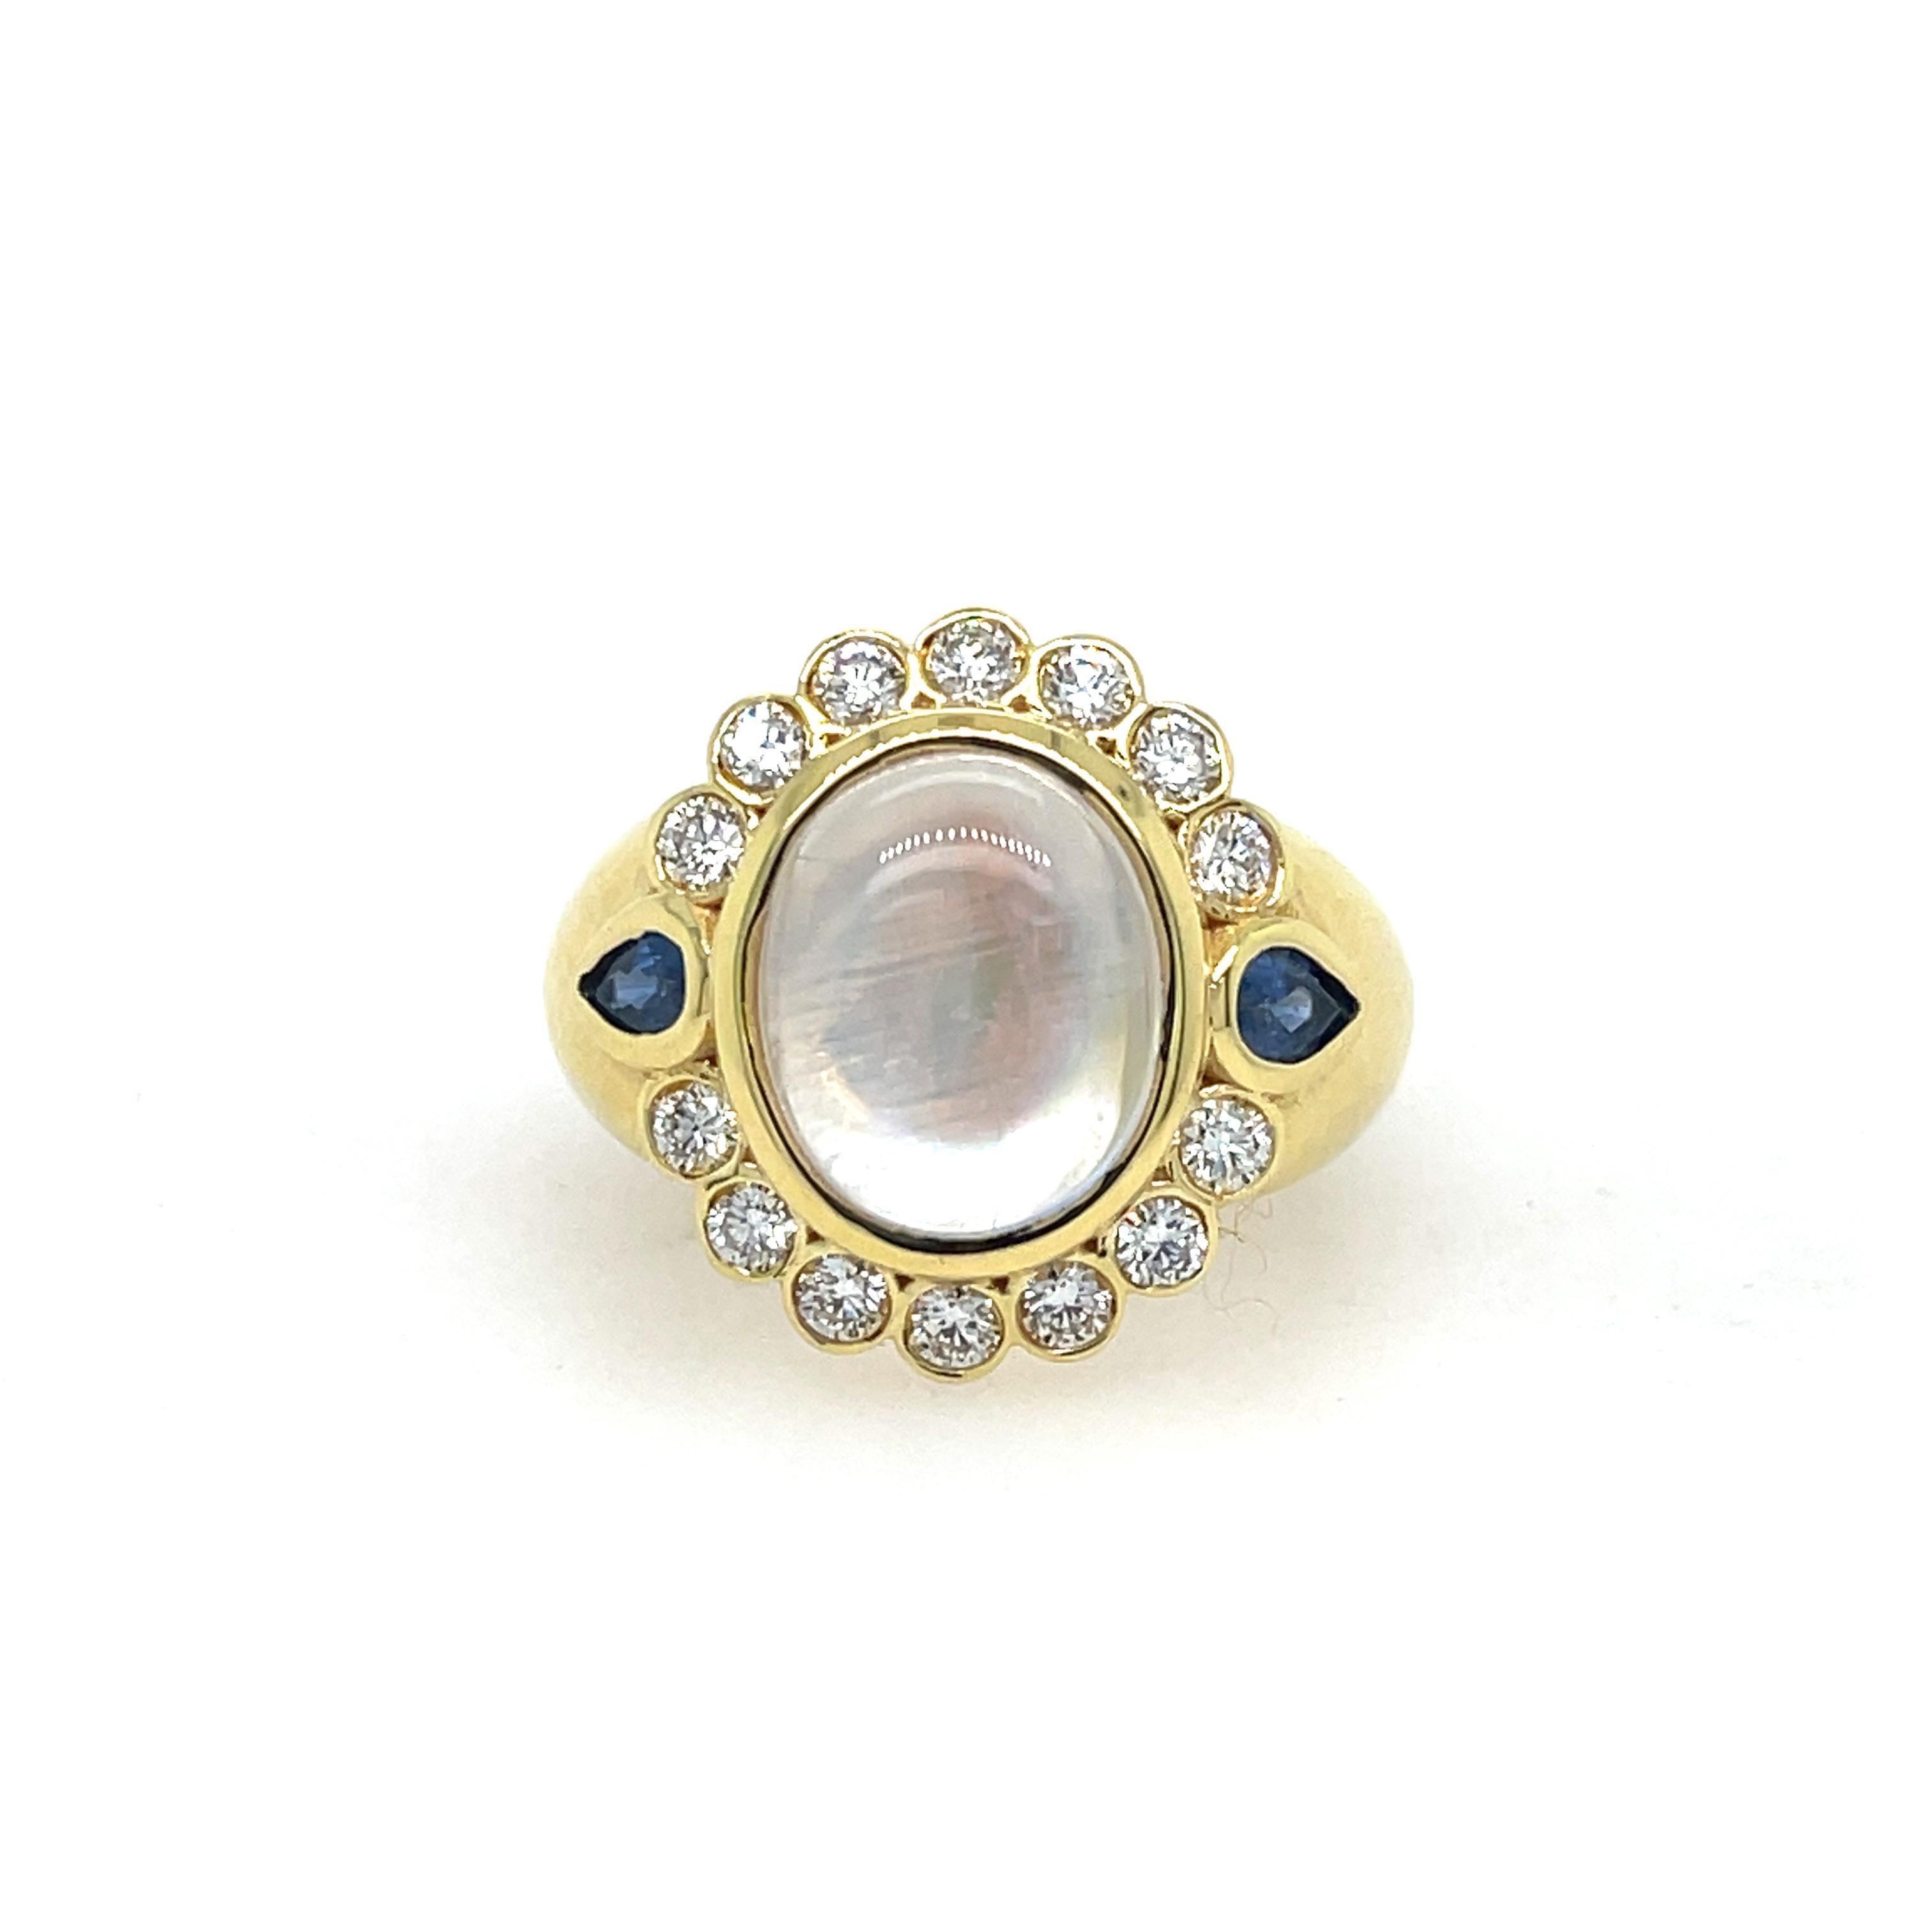 Mazza Moonstone, Sapphire, & Diamond Ring In 14K Yellow Gold. The Ring Features A Cabochon Moonstone, Two Pear Shape Blue Sapphires, & 0.70 Ctw Of Round Diamonds. Ring Size 7.